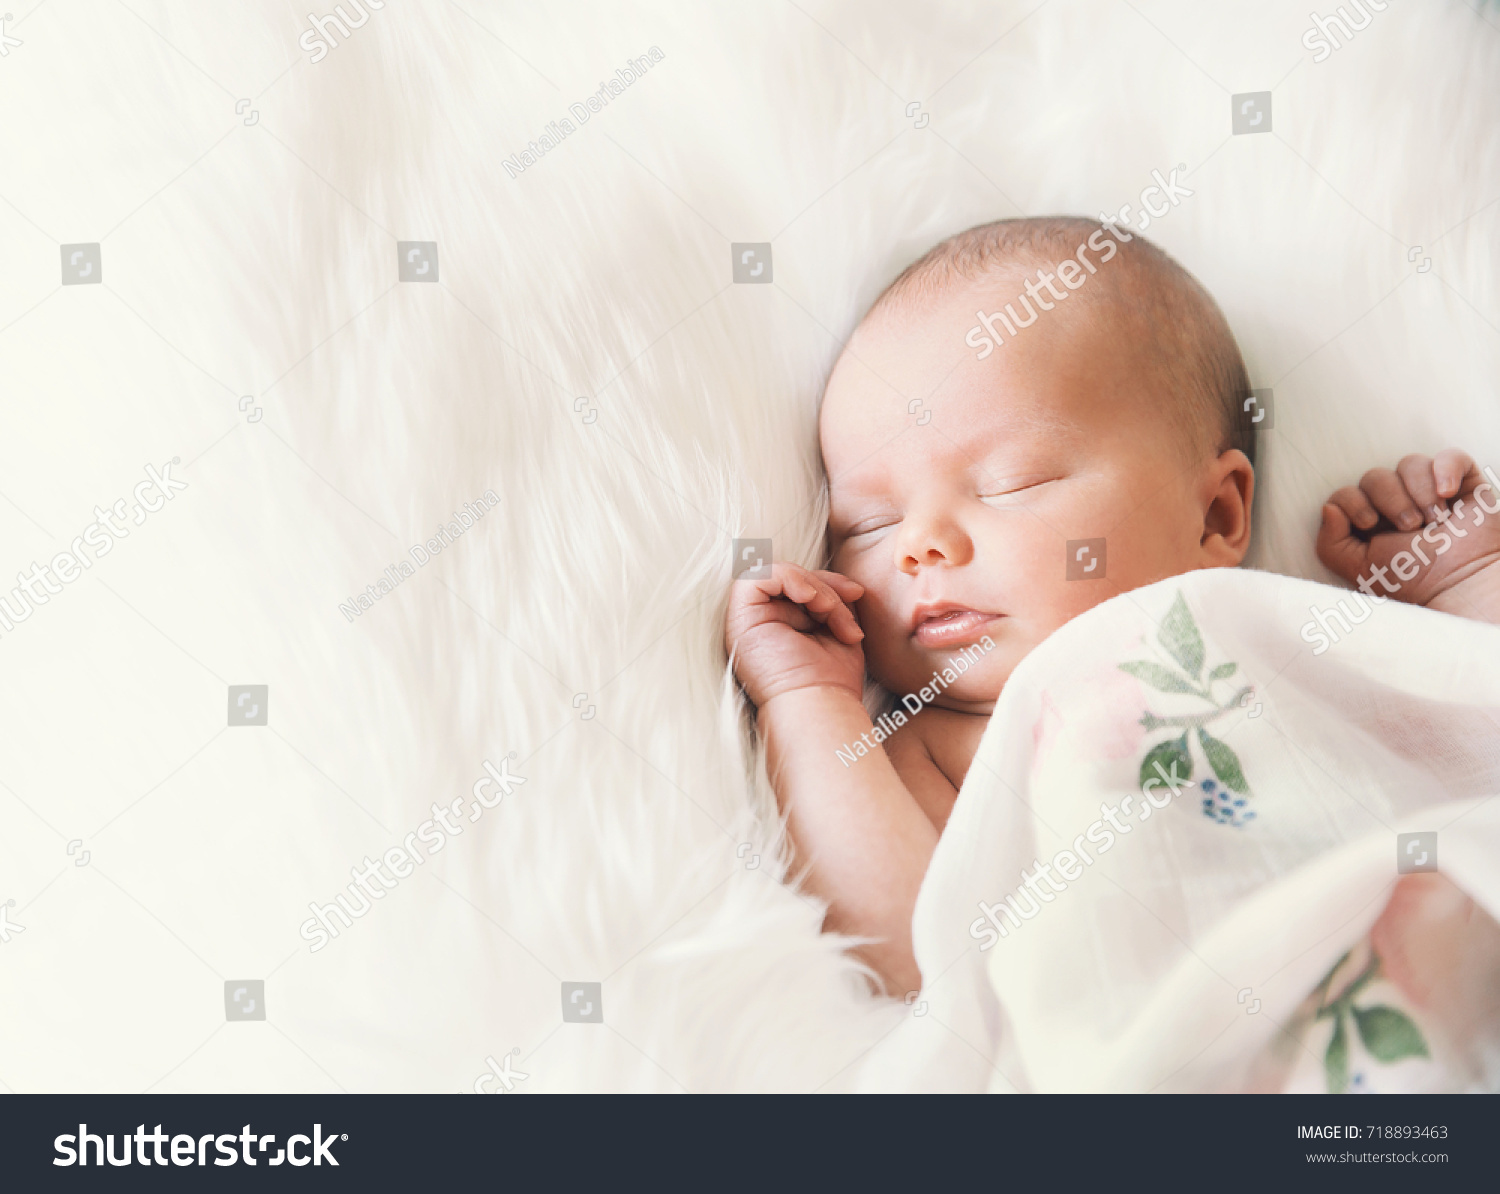 Sleeping newborn baby in a wrap on white blanket. Beautiful portrait of little child girl 7 days, one week old. #718893463